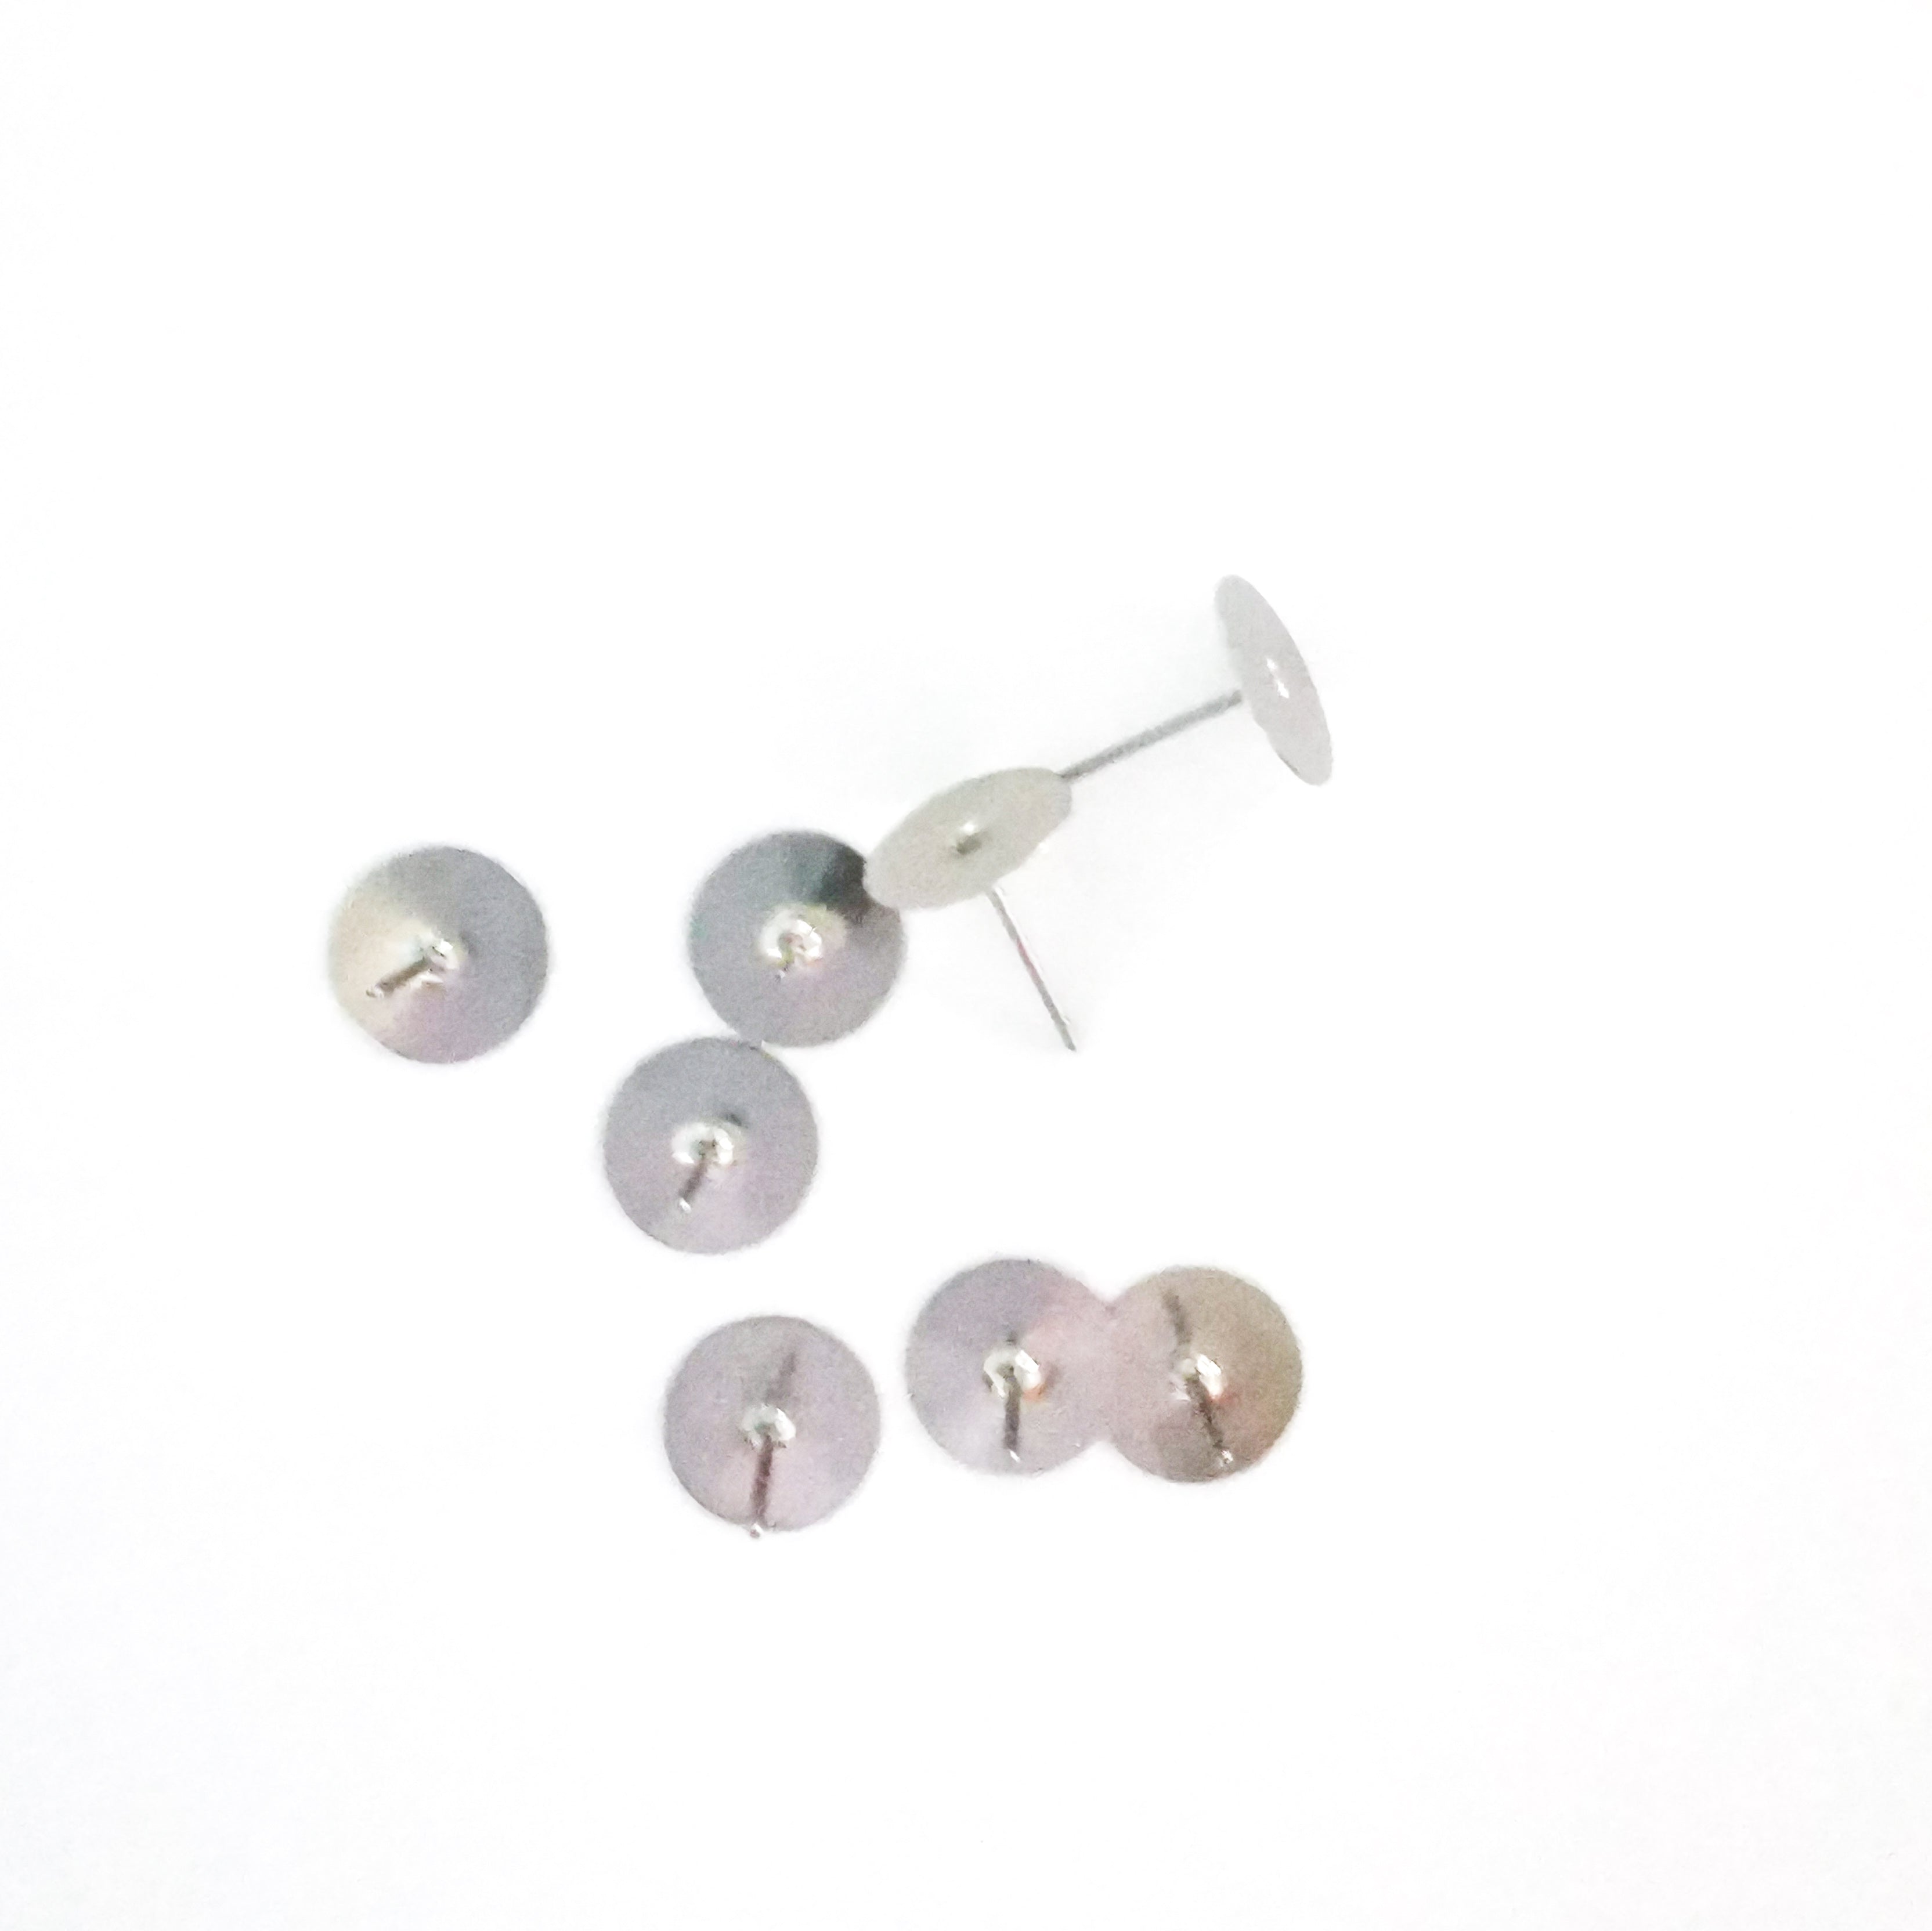 8mm Silver Stainless Steel Earring Posts - 100 pieces